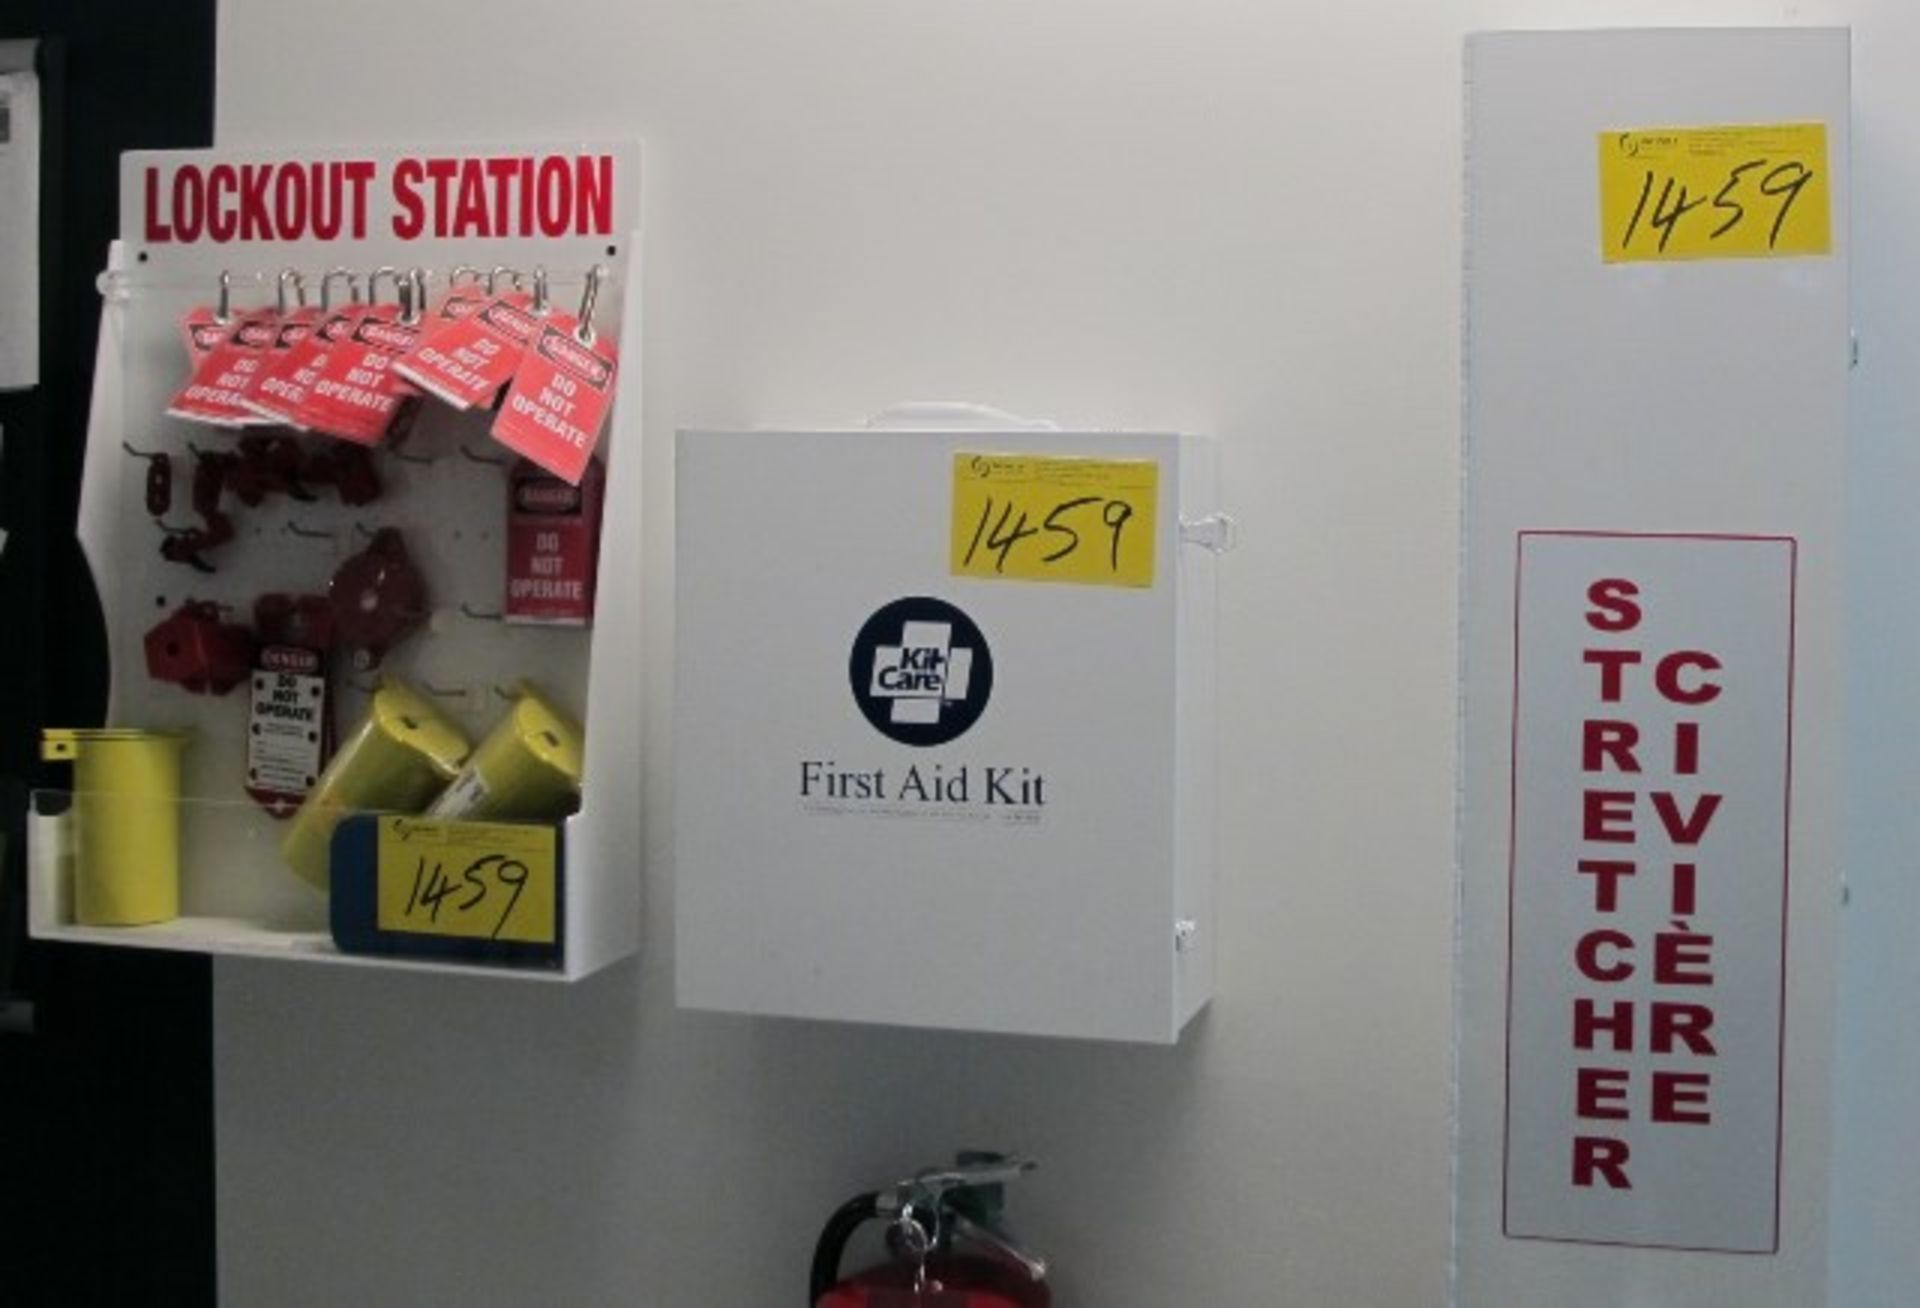 LOT ASST. FIRST AID KITS, SUPPIES, STRETCHER LOCK-OUT STATION, ETC. (CLEAN ROOM) - Image 2 of 3